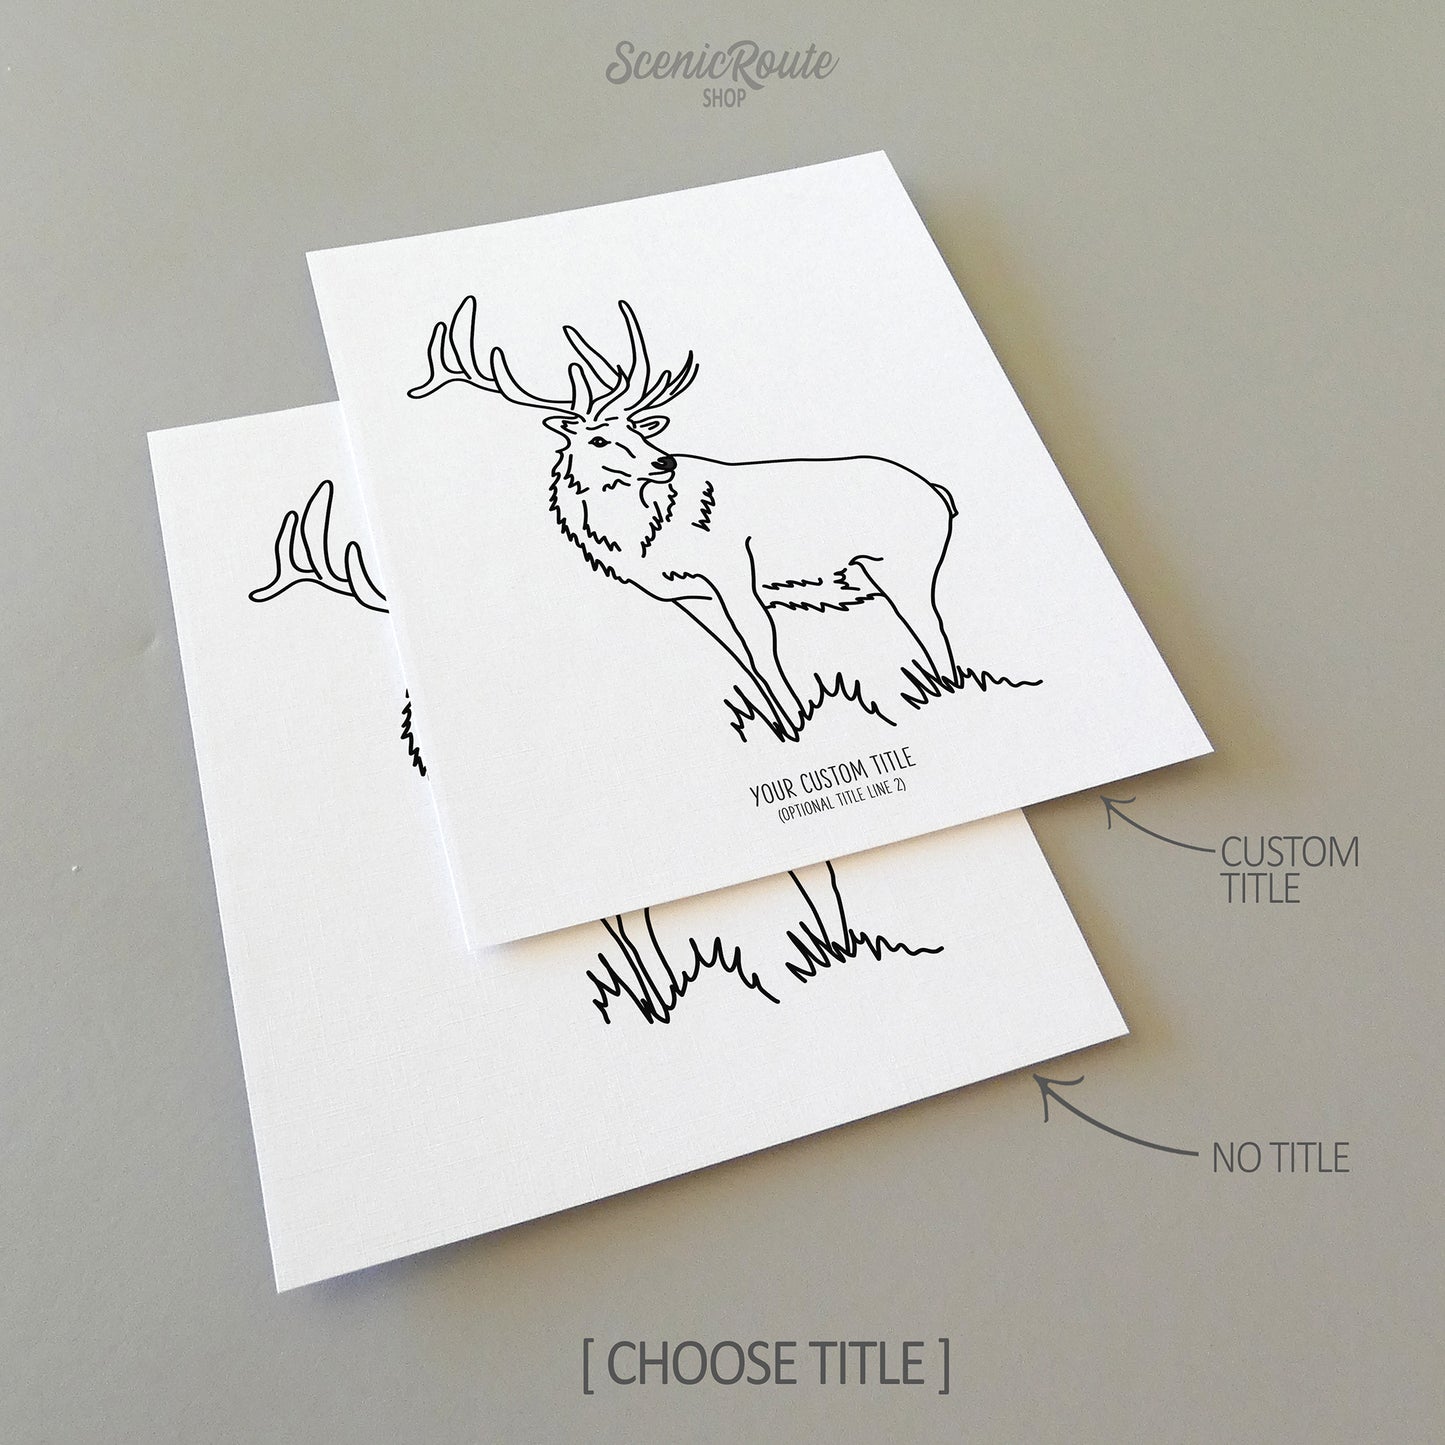 Two line art drawings of an Elk on white linen paper with a gray background.  The pieces are shown with “No Title” and “Custom Title” options for the available art print options.